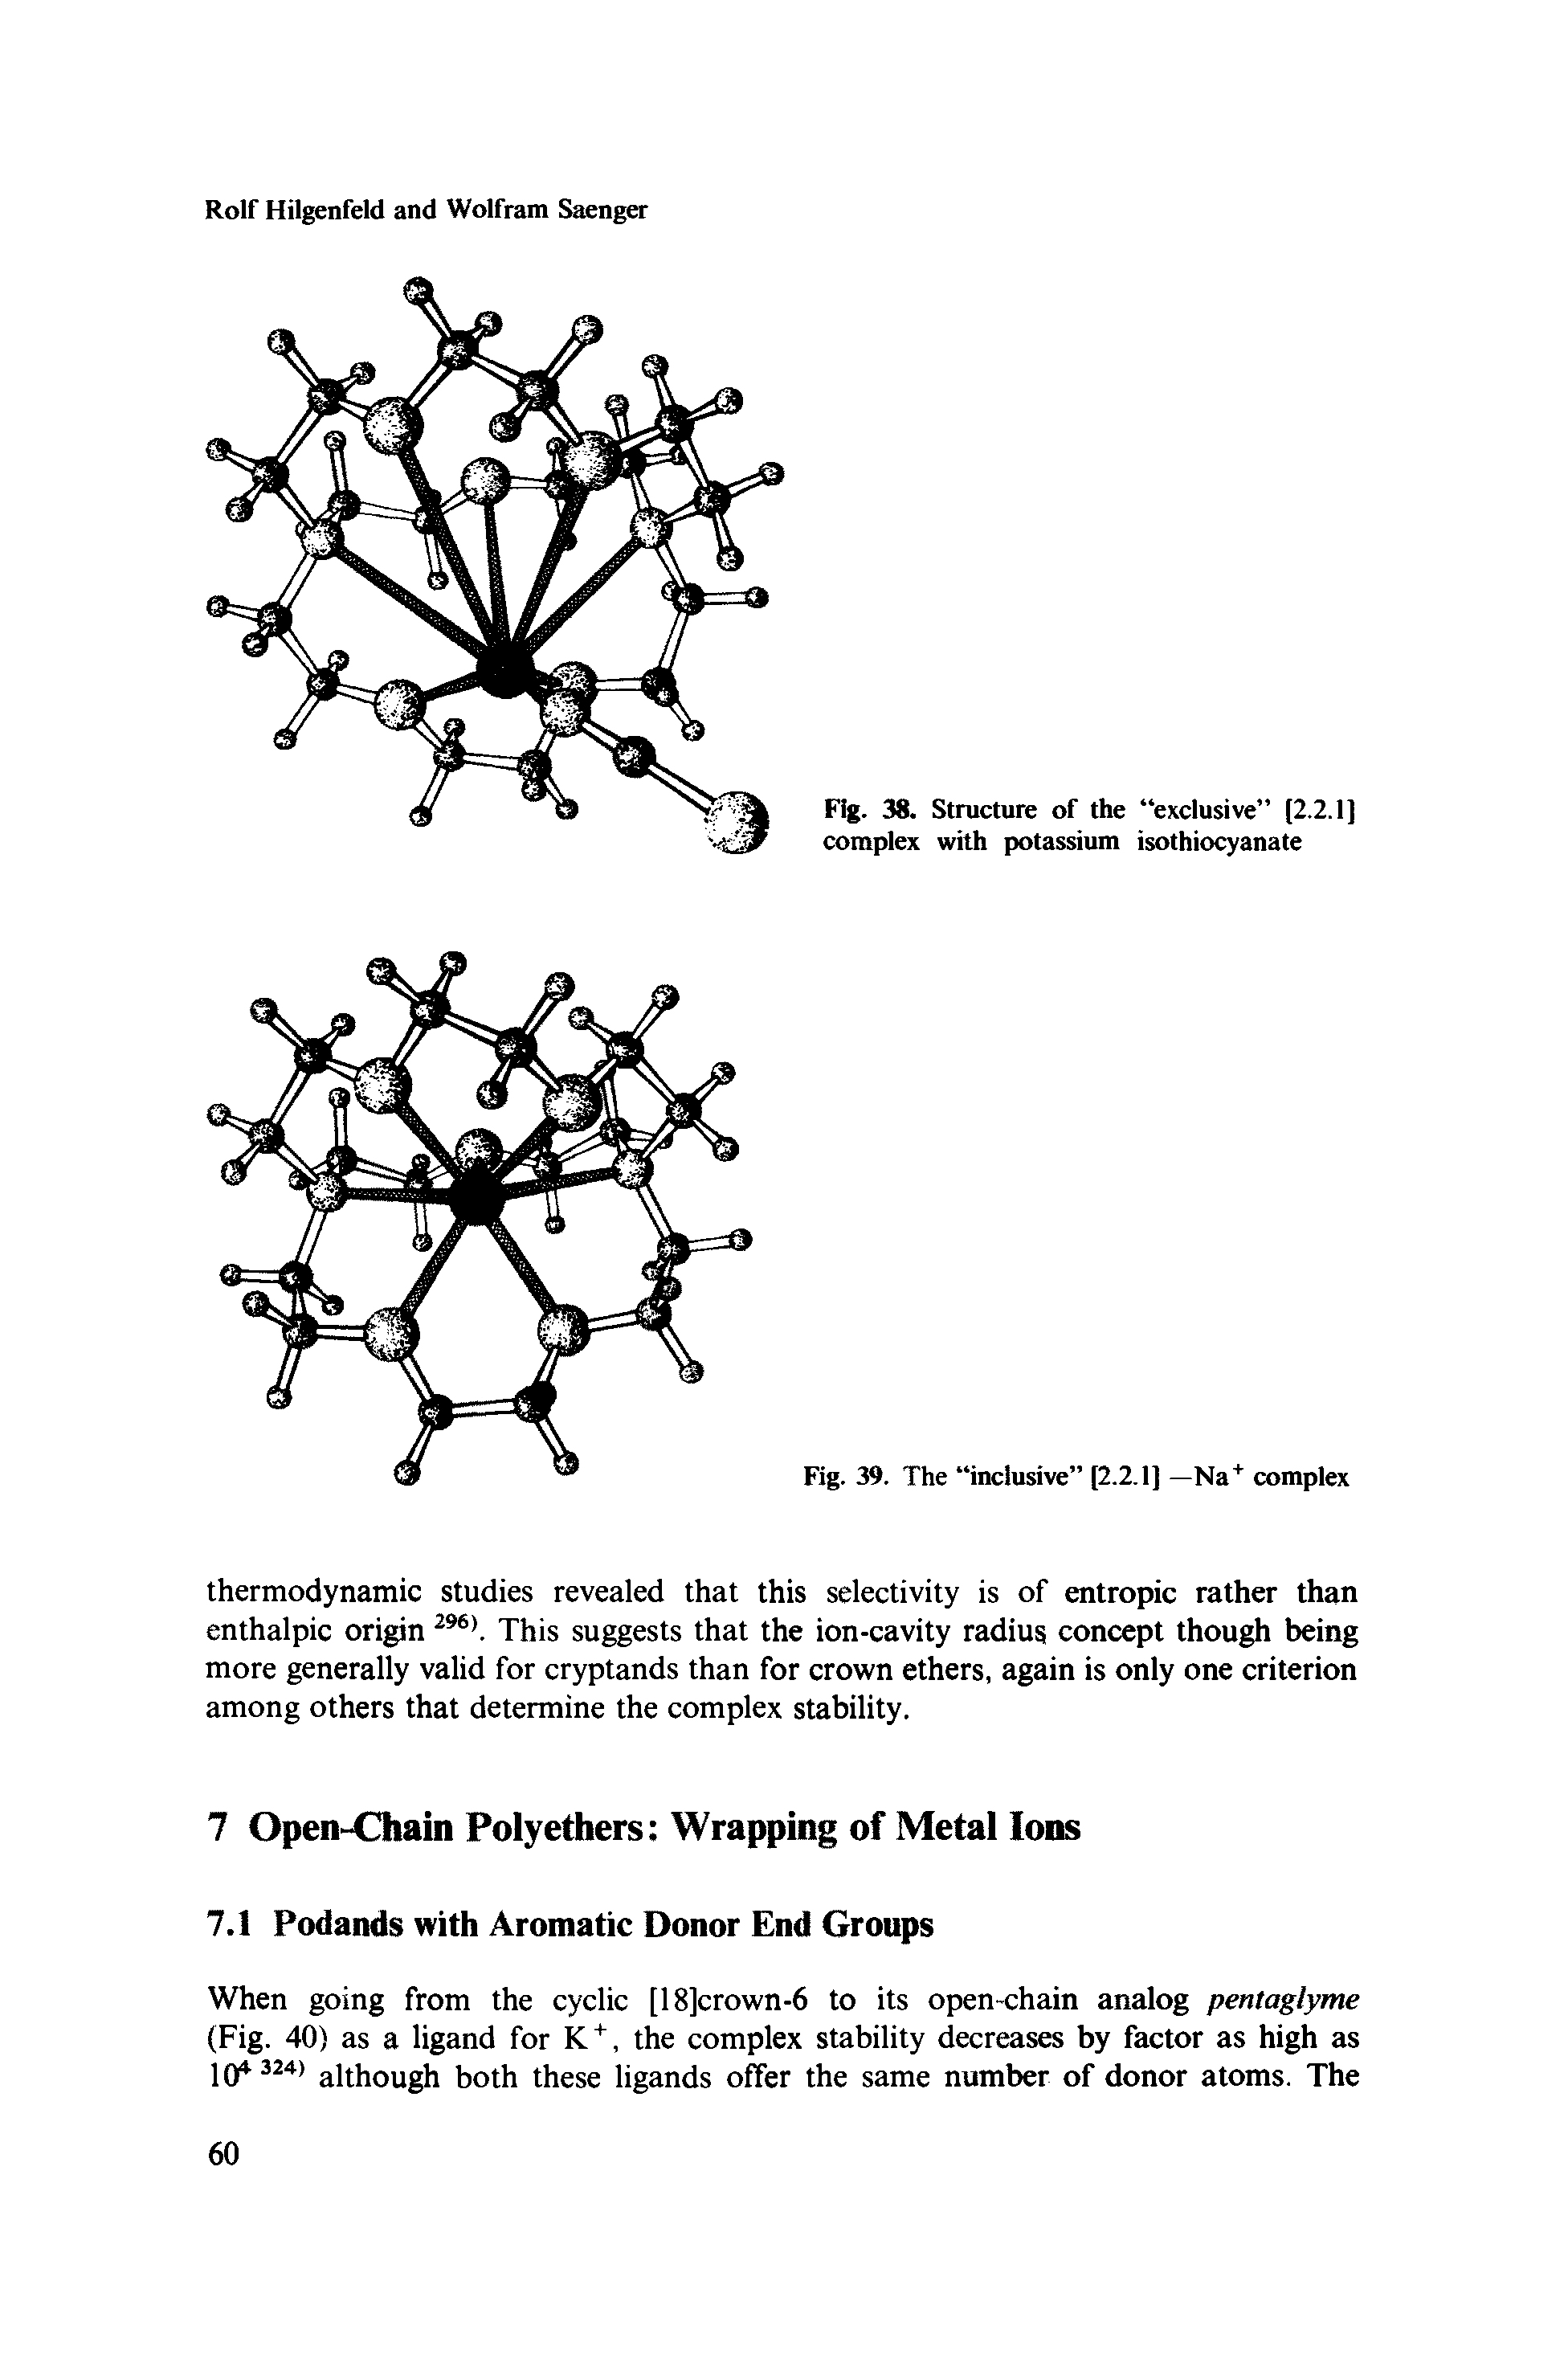 Fig. 38. Structure of the exclusive [2.2.1] complex with potassium isothiocyanate...